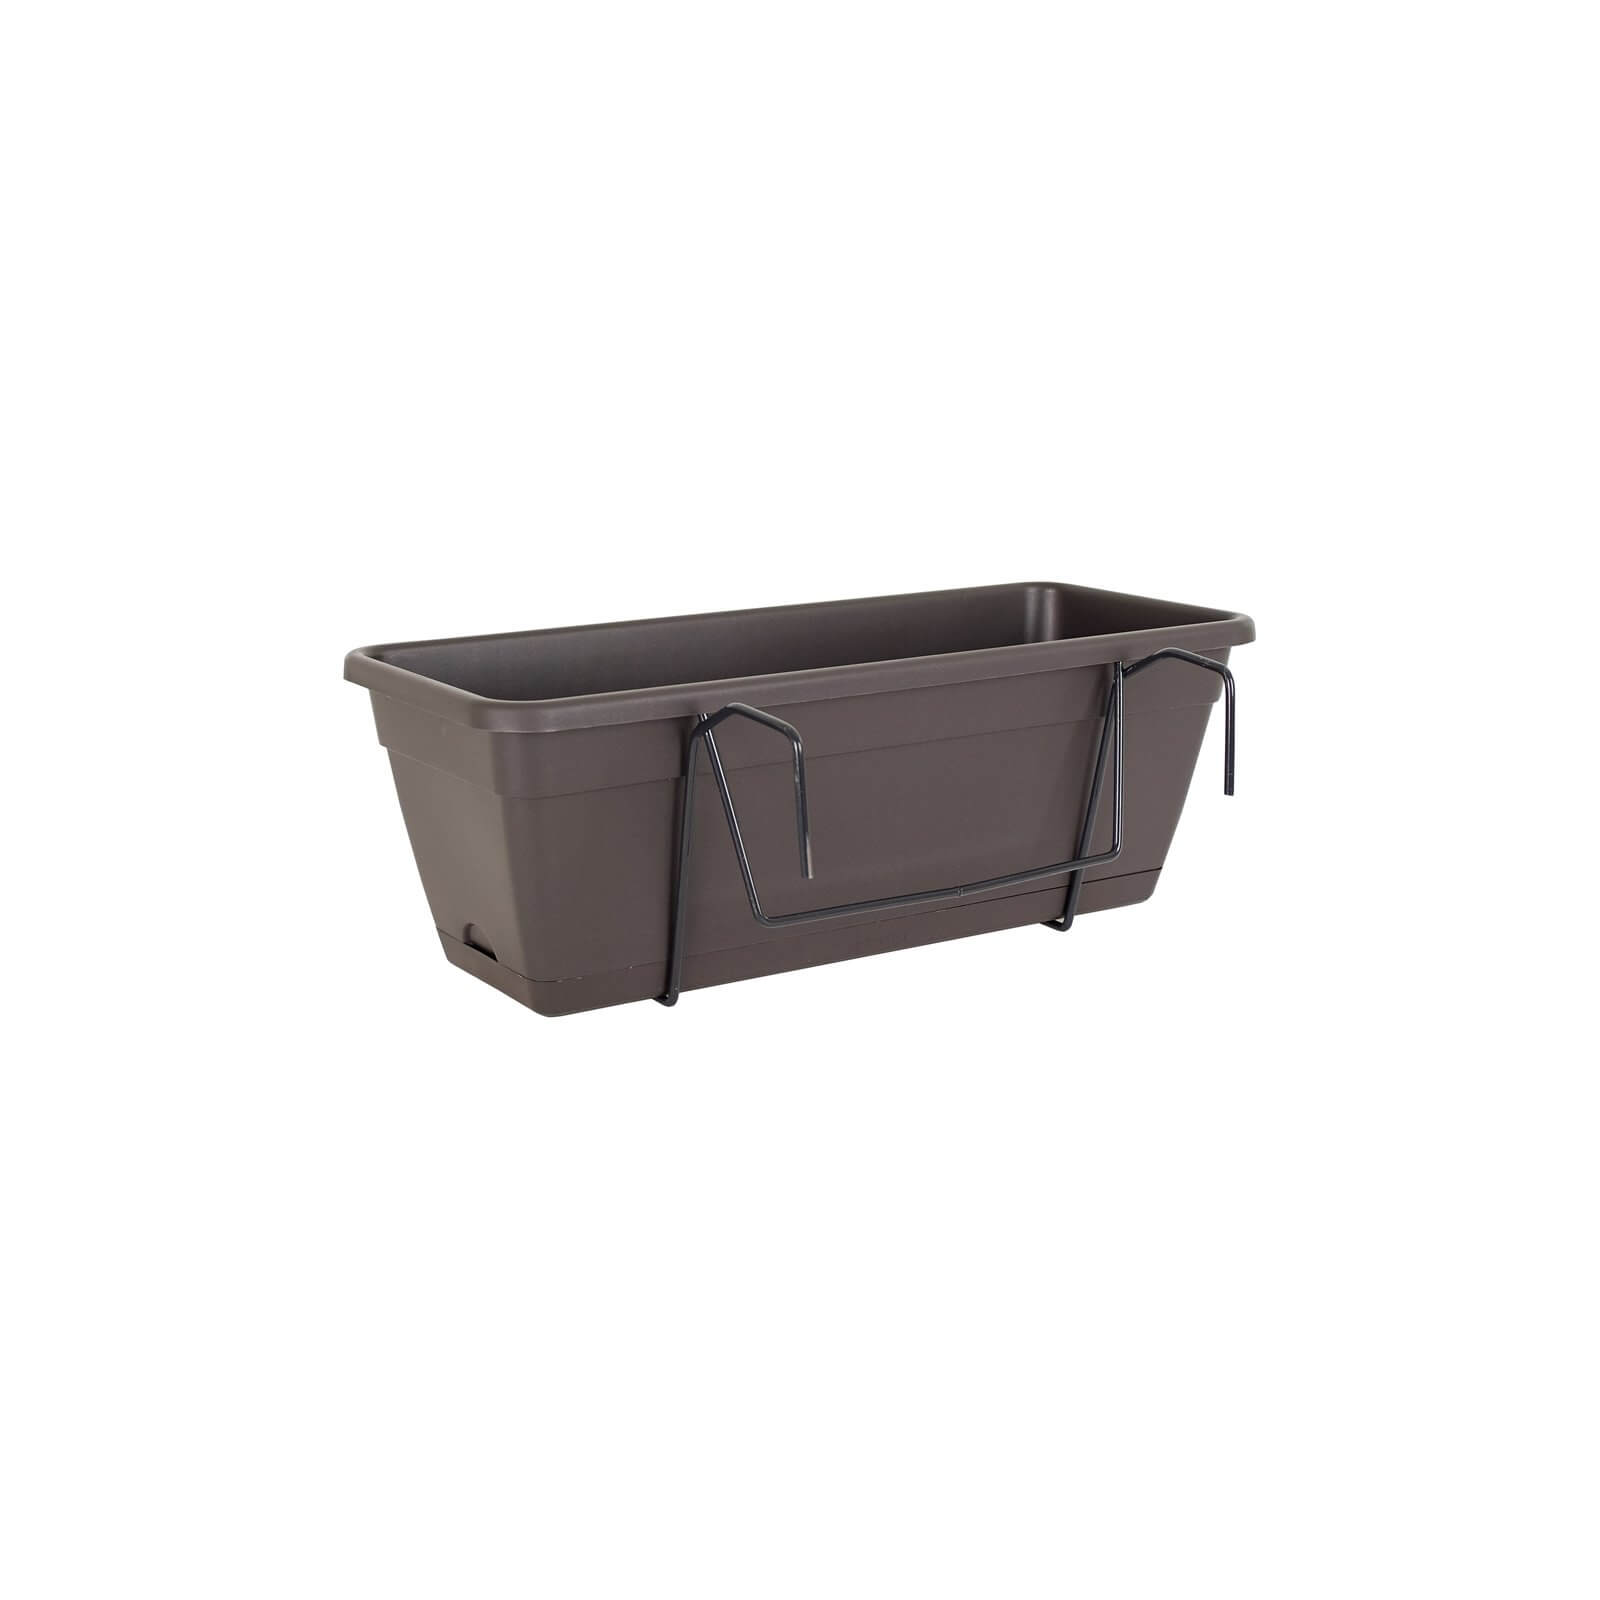 Balcony Trough Kit in Anthracite - 50cm